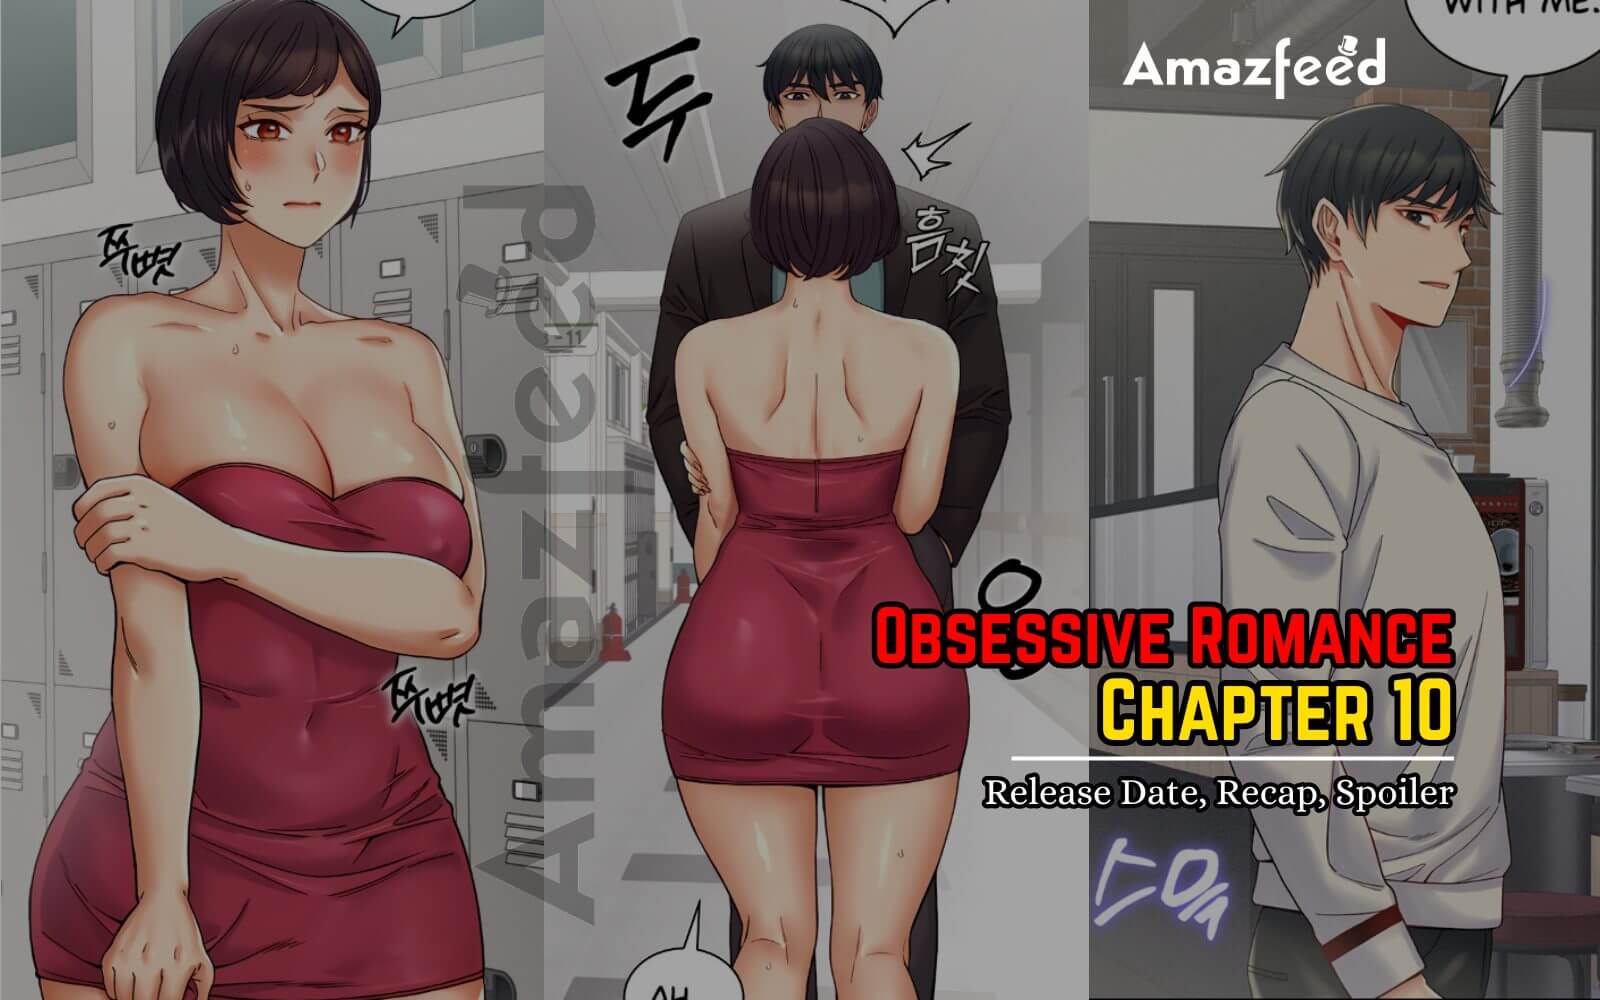 Obsessive Romance Chapter 10 Release Date